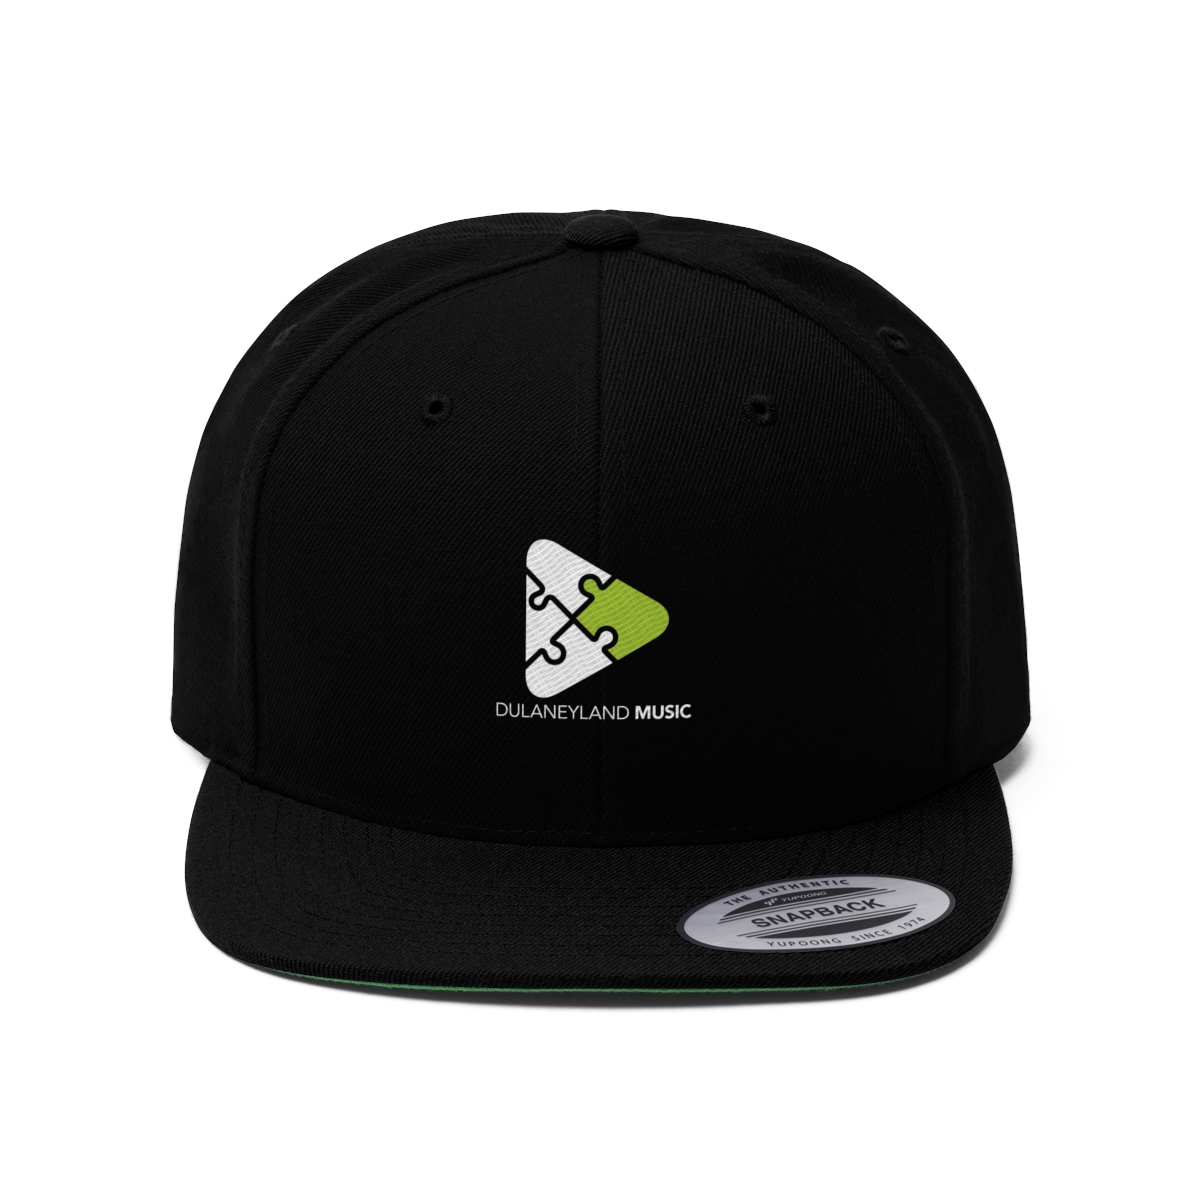 Copy of The Journey Continues Tour Snapback product thumbnail image